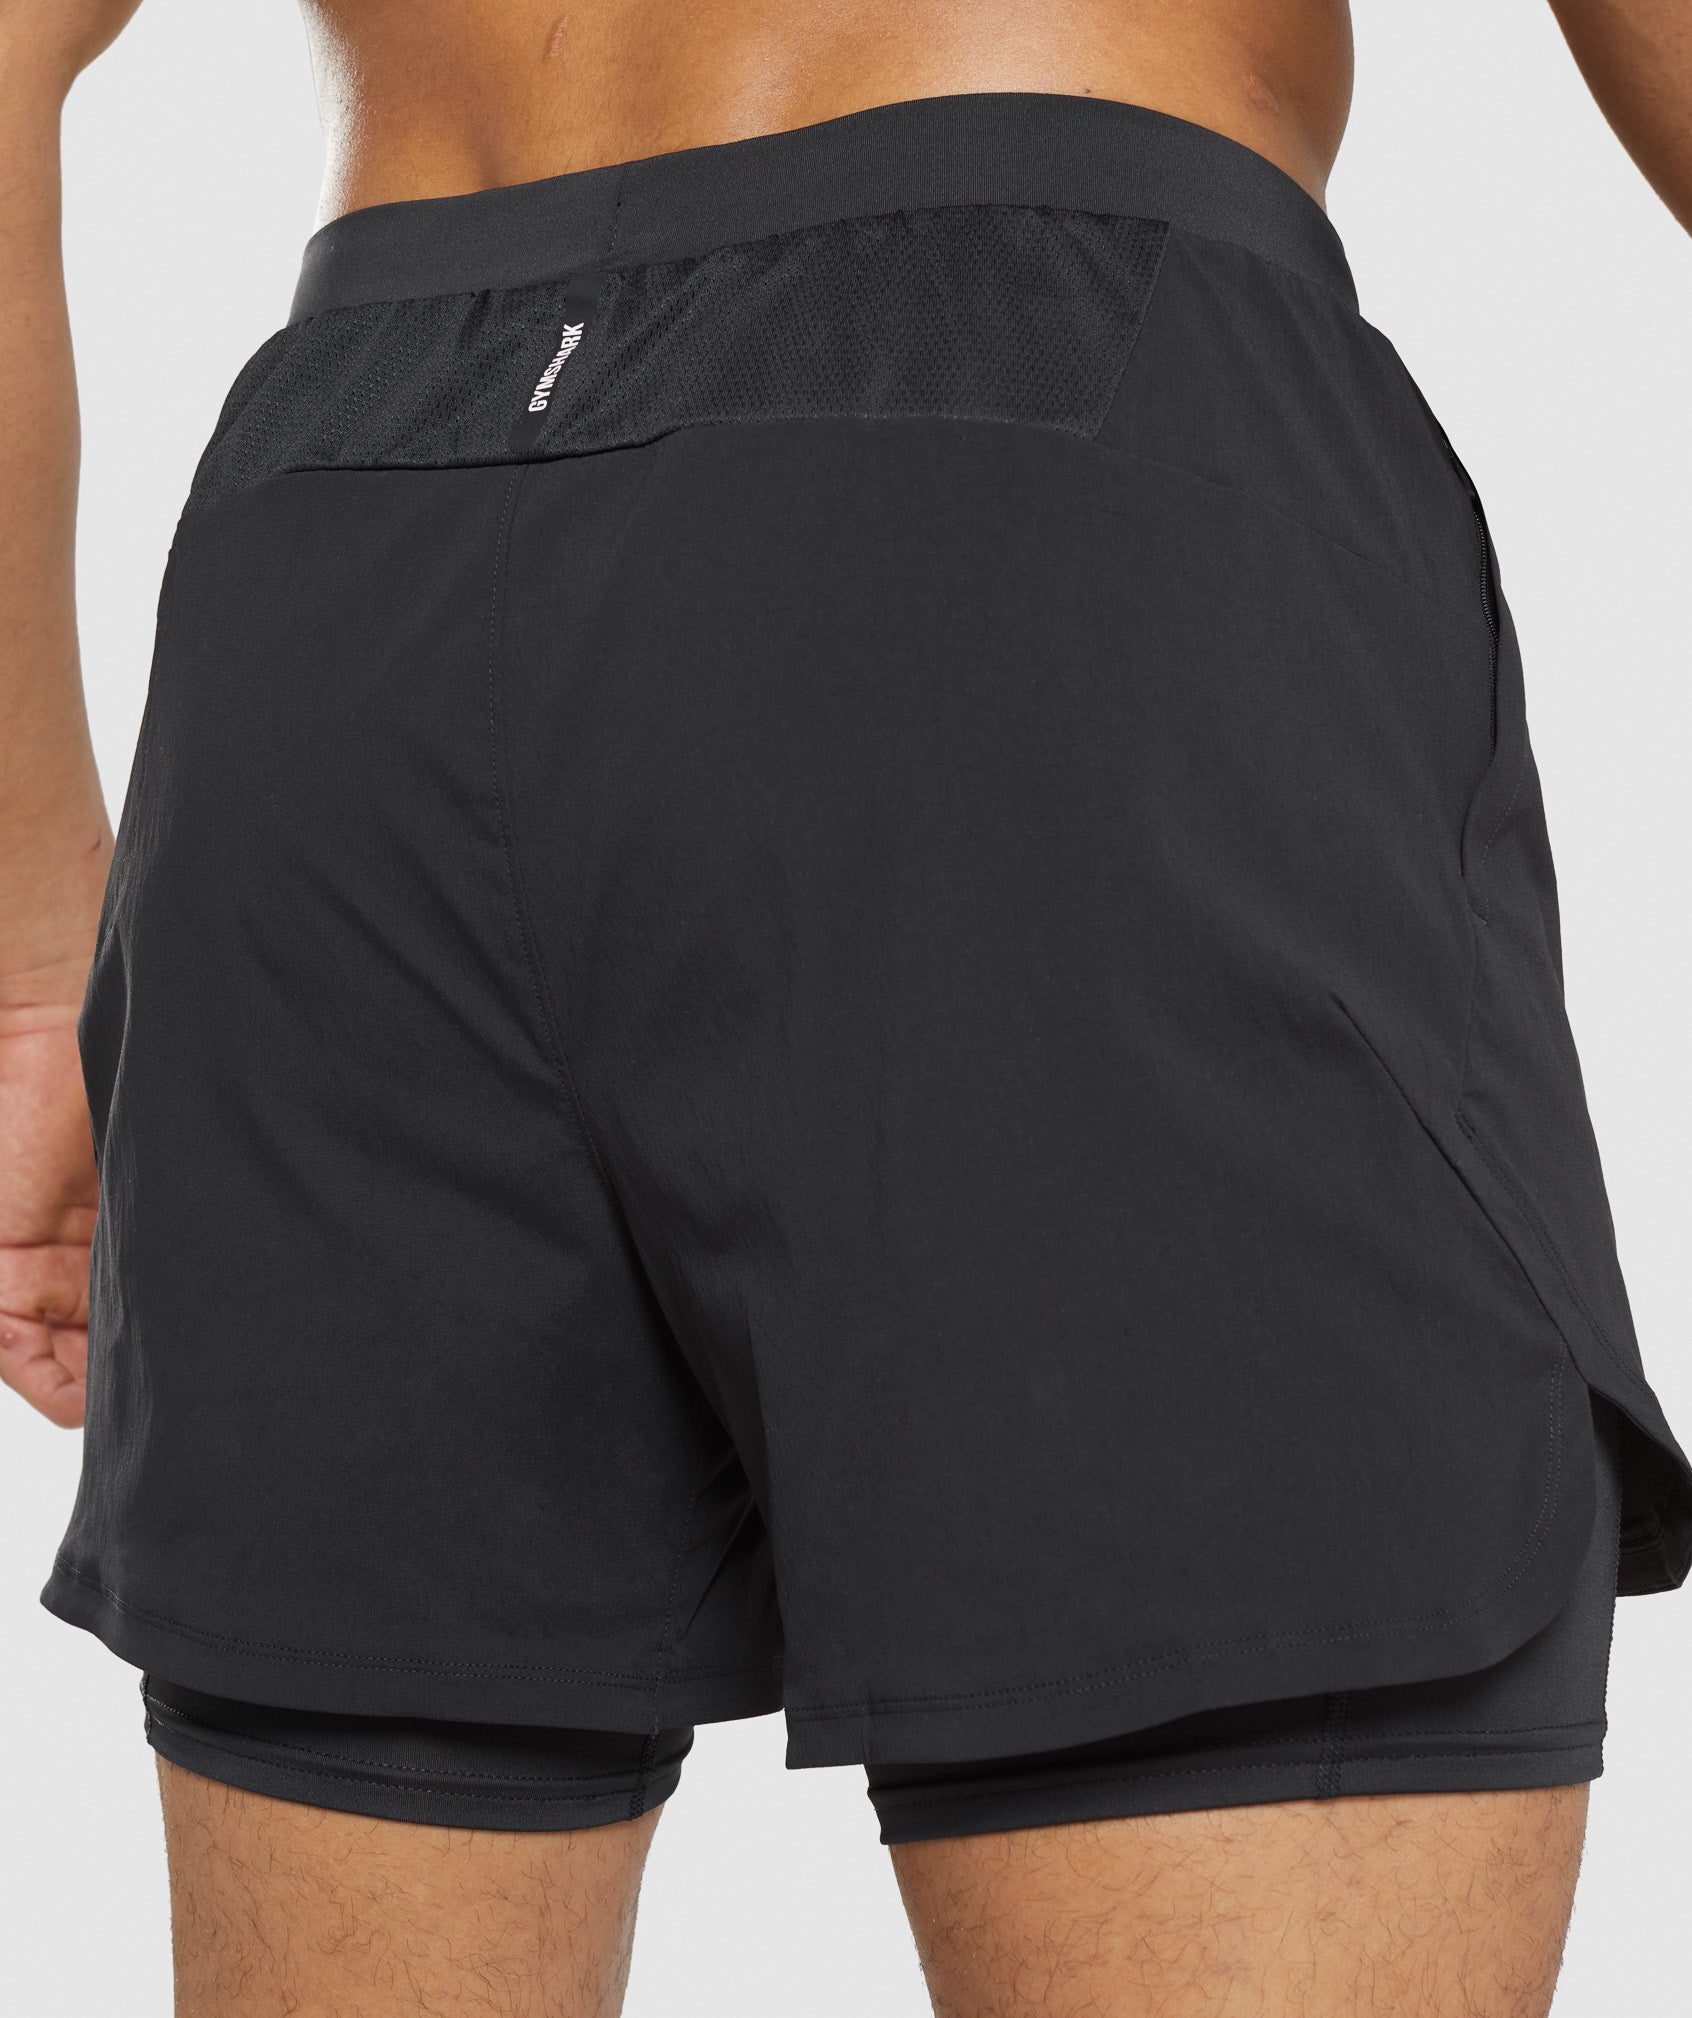 Speed Evolve 5" 2 In 1 Shorts in Black - view 5